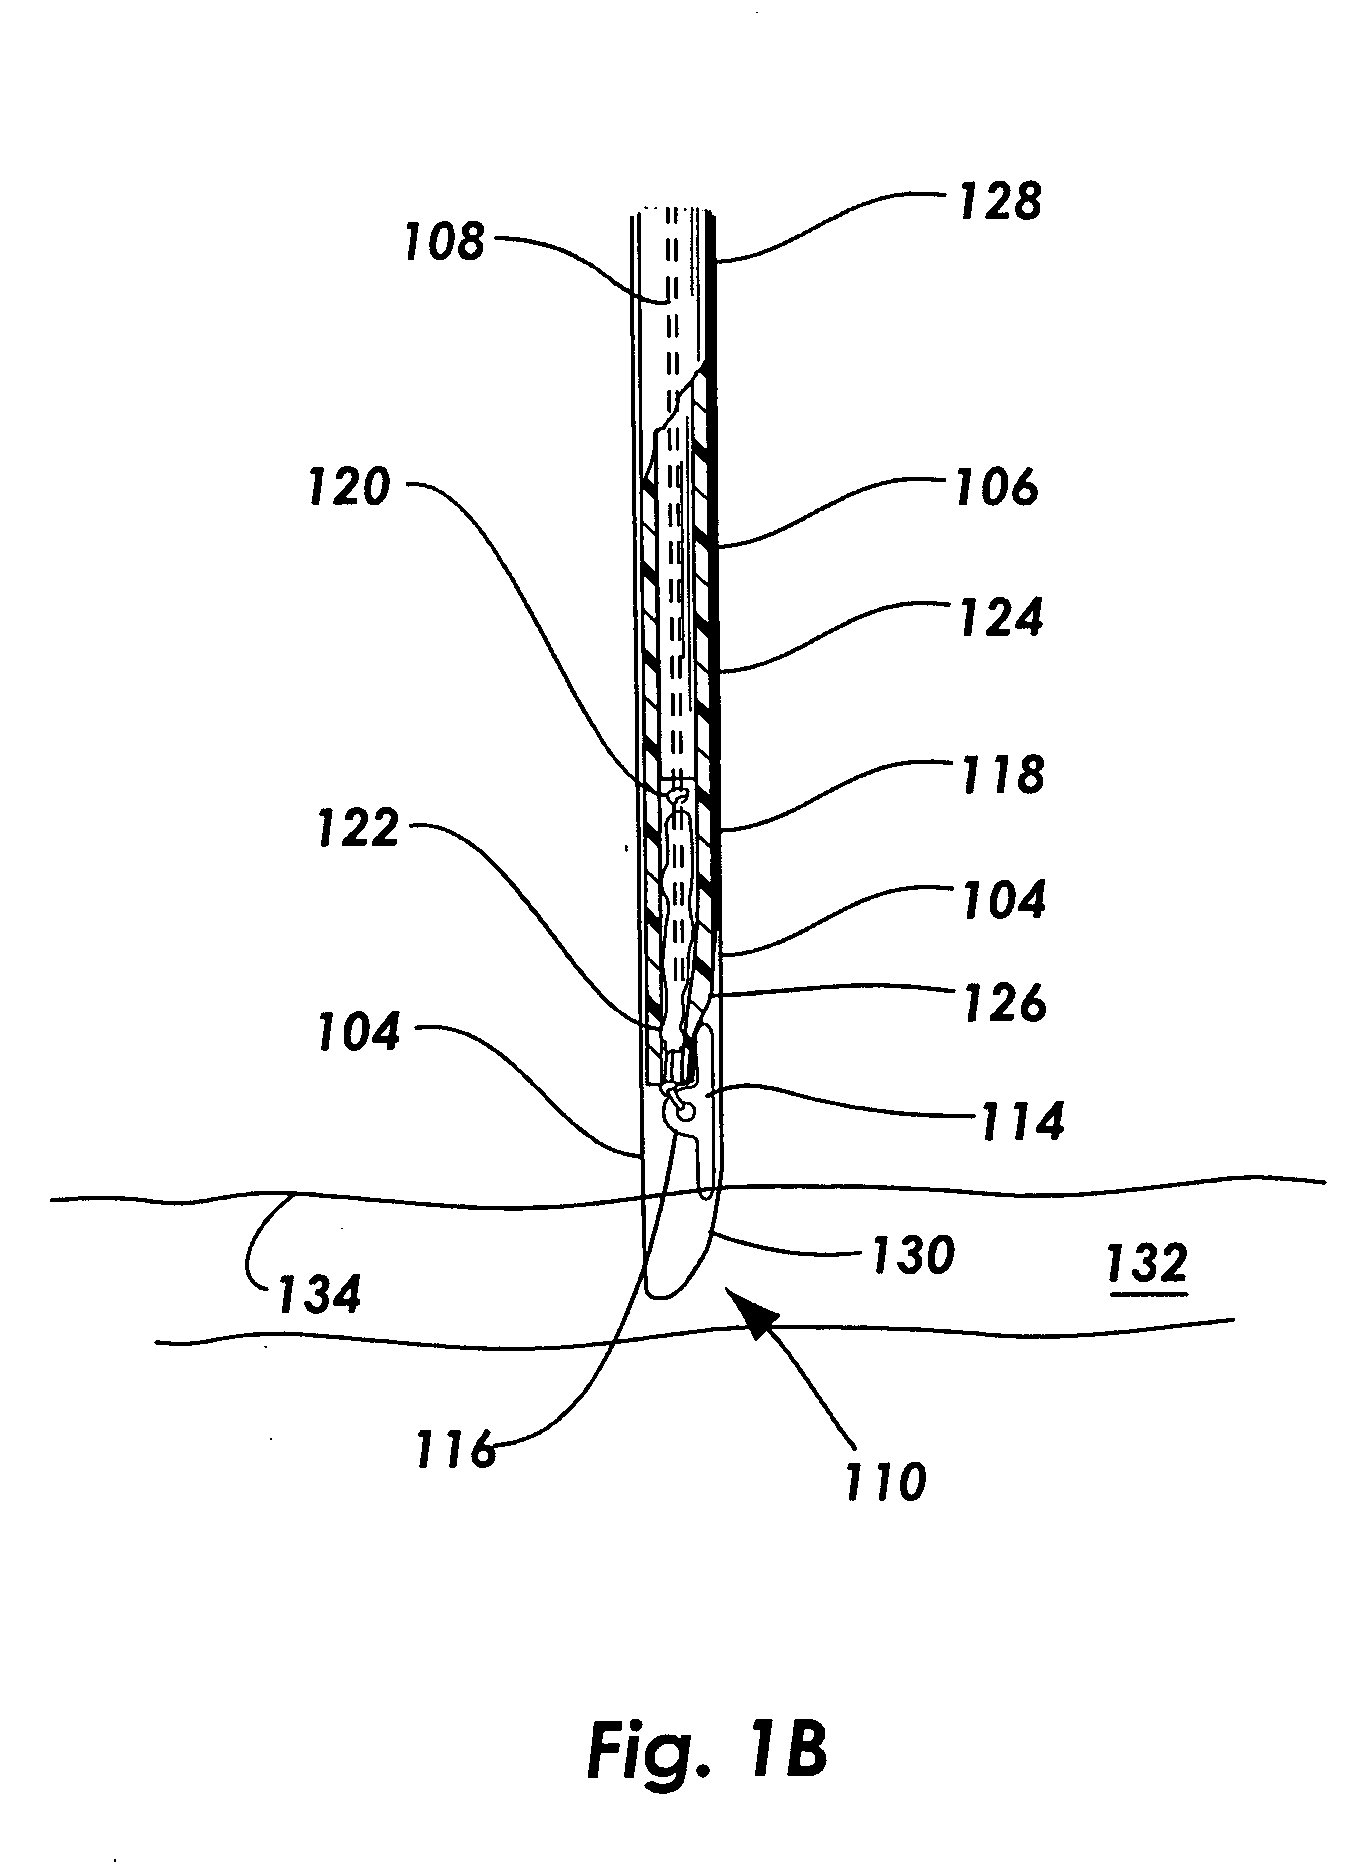 Vascular sealing device with high surface area sealing plug